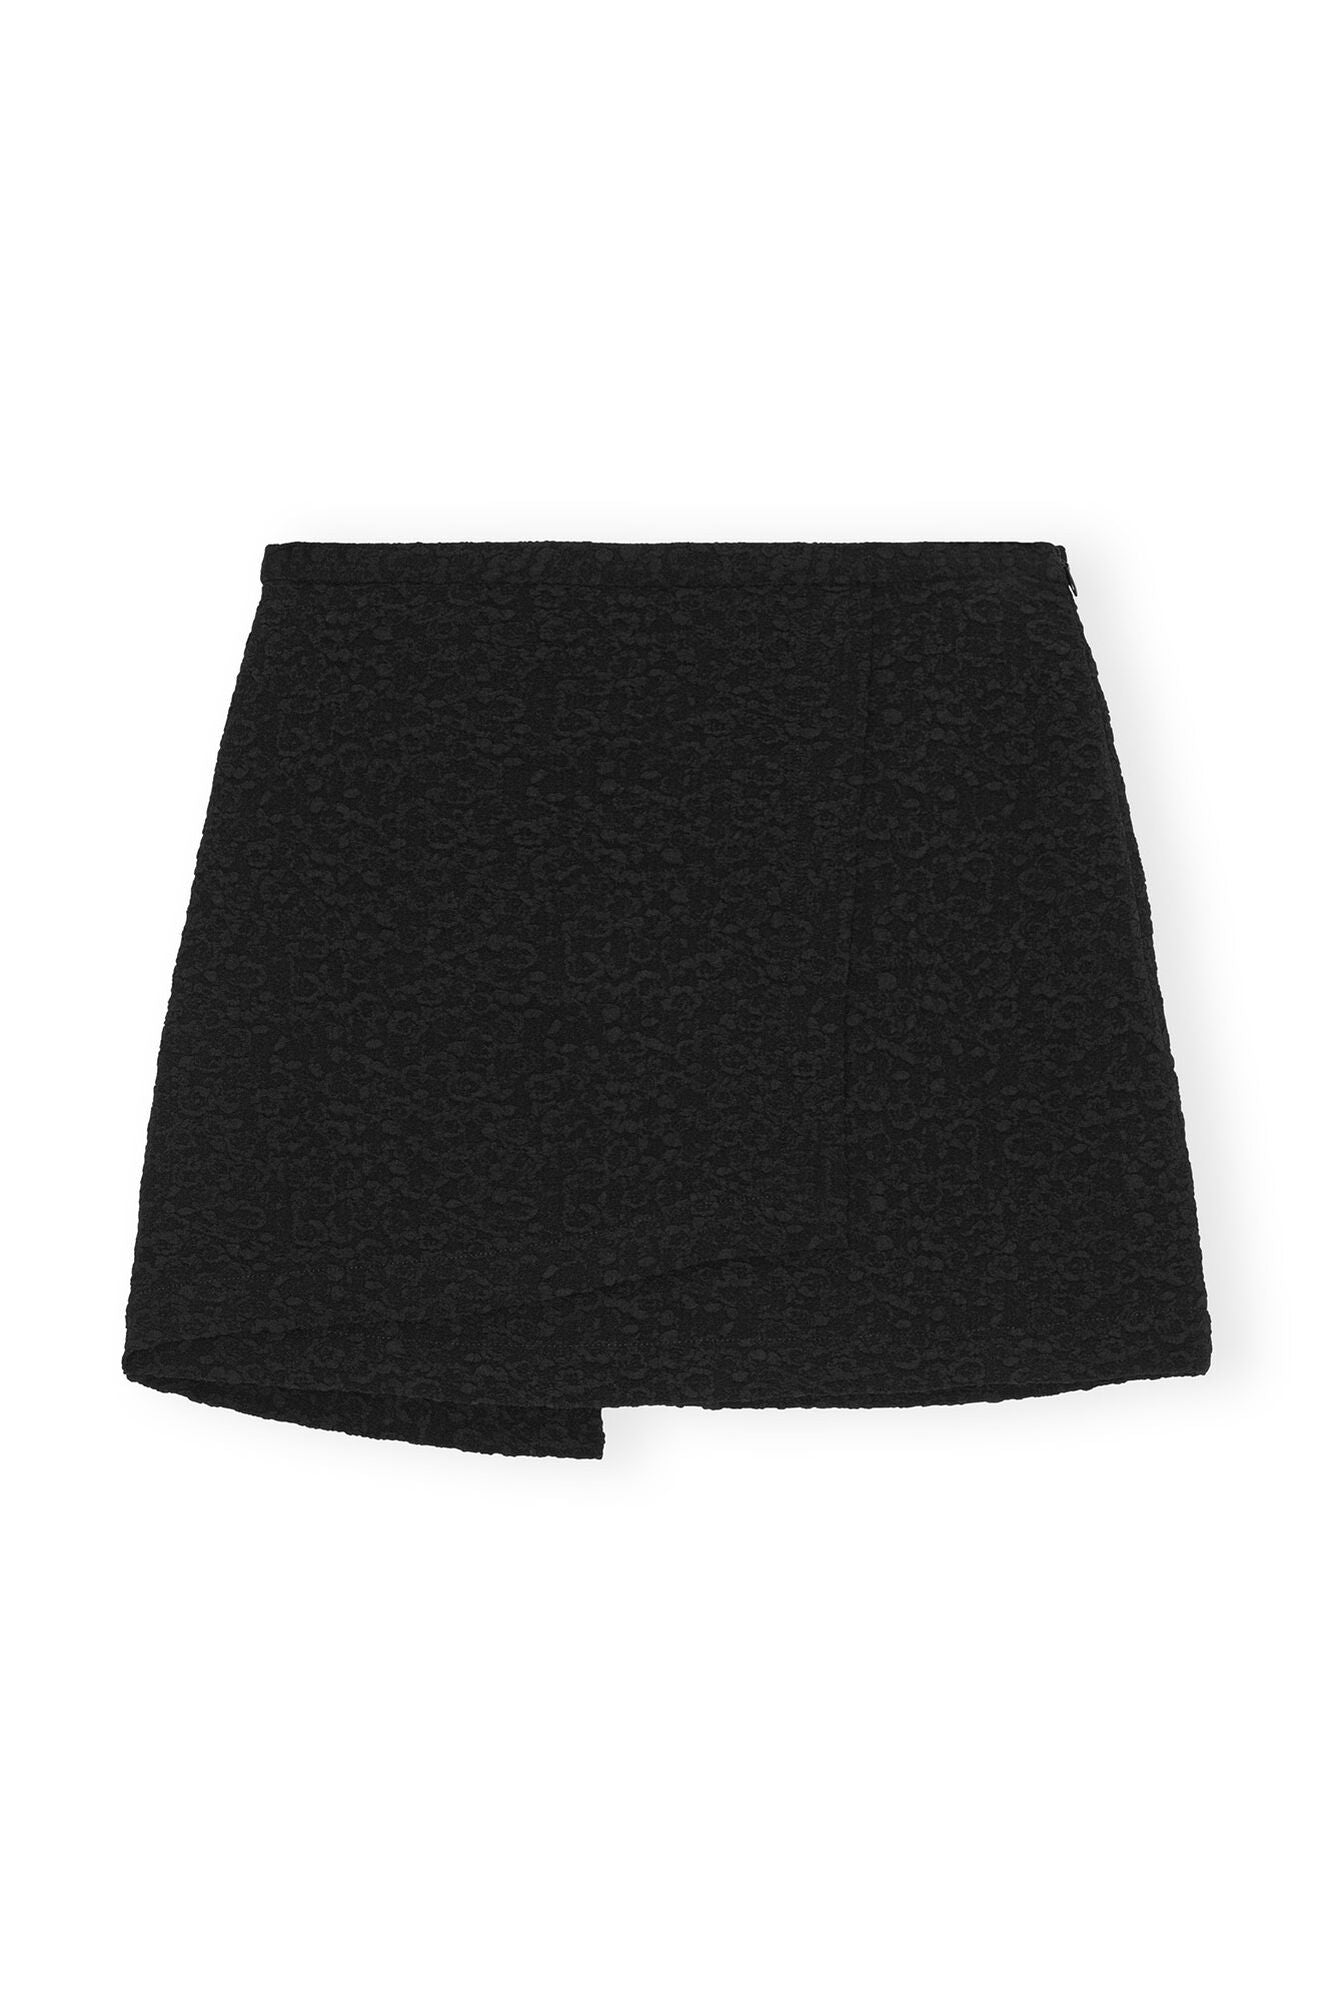 TEXTURED SUITING MINI SKIRT IN BLACK - Romi Boutique